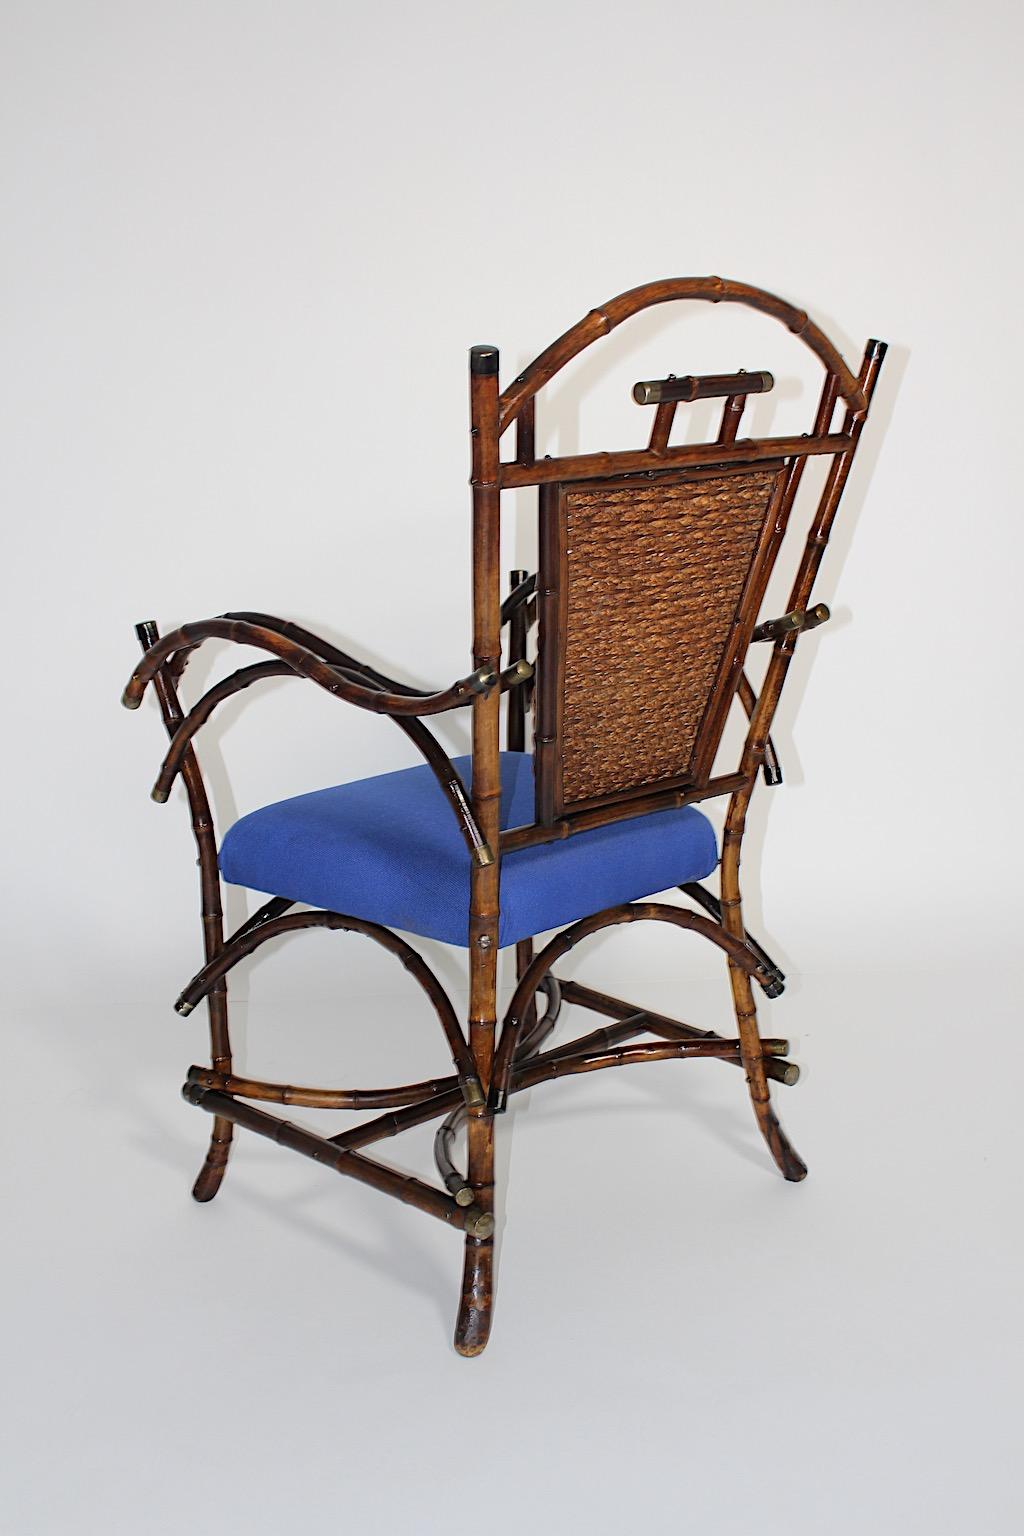 Early 20th Century Jugendstil Vintage Rattan Bamboo Blue Armchair Side Chair circa 1915 Austria For Sale